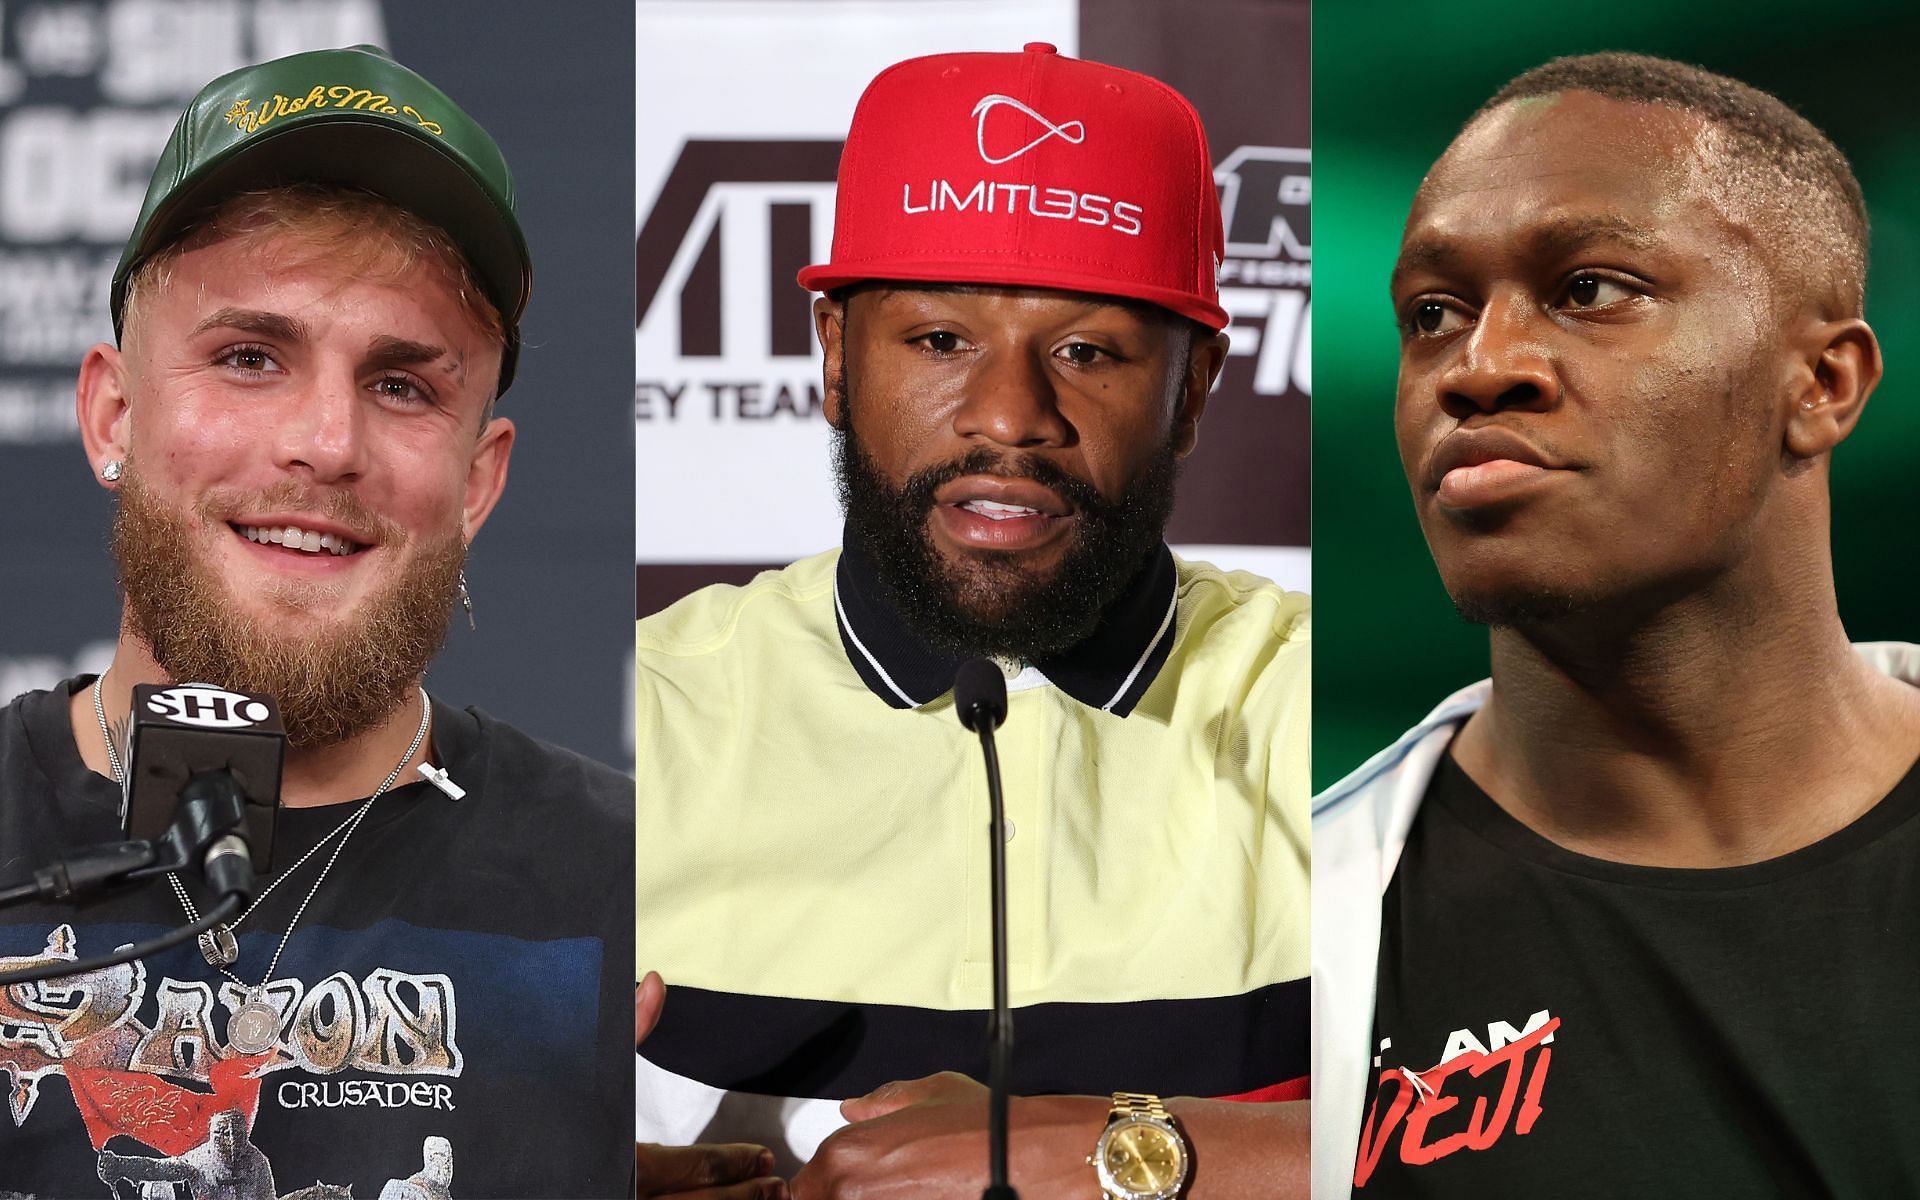 Jake Paul (left), Floyd Mayweather (center), and Deji (right) (Image credits Getty Images)